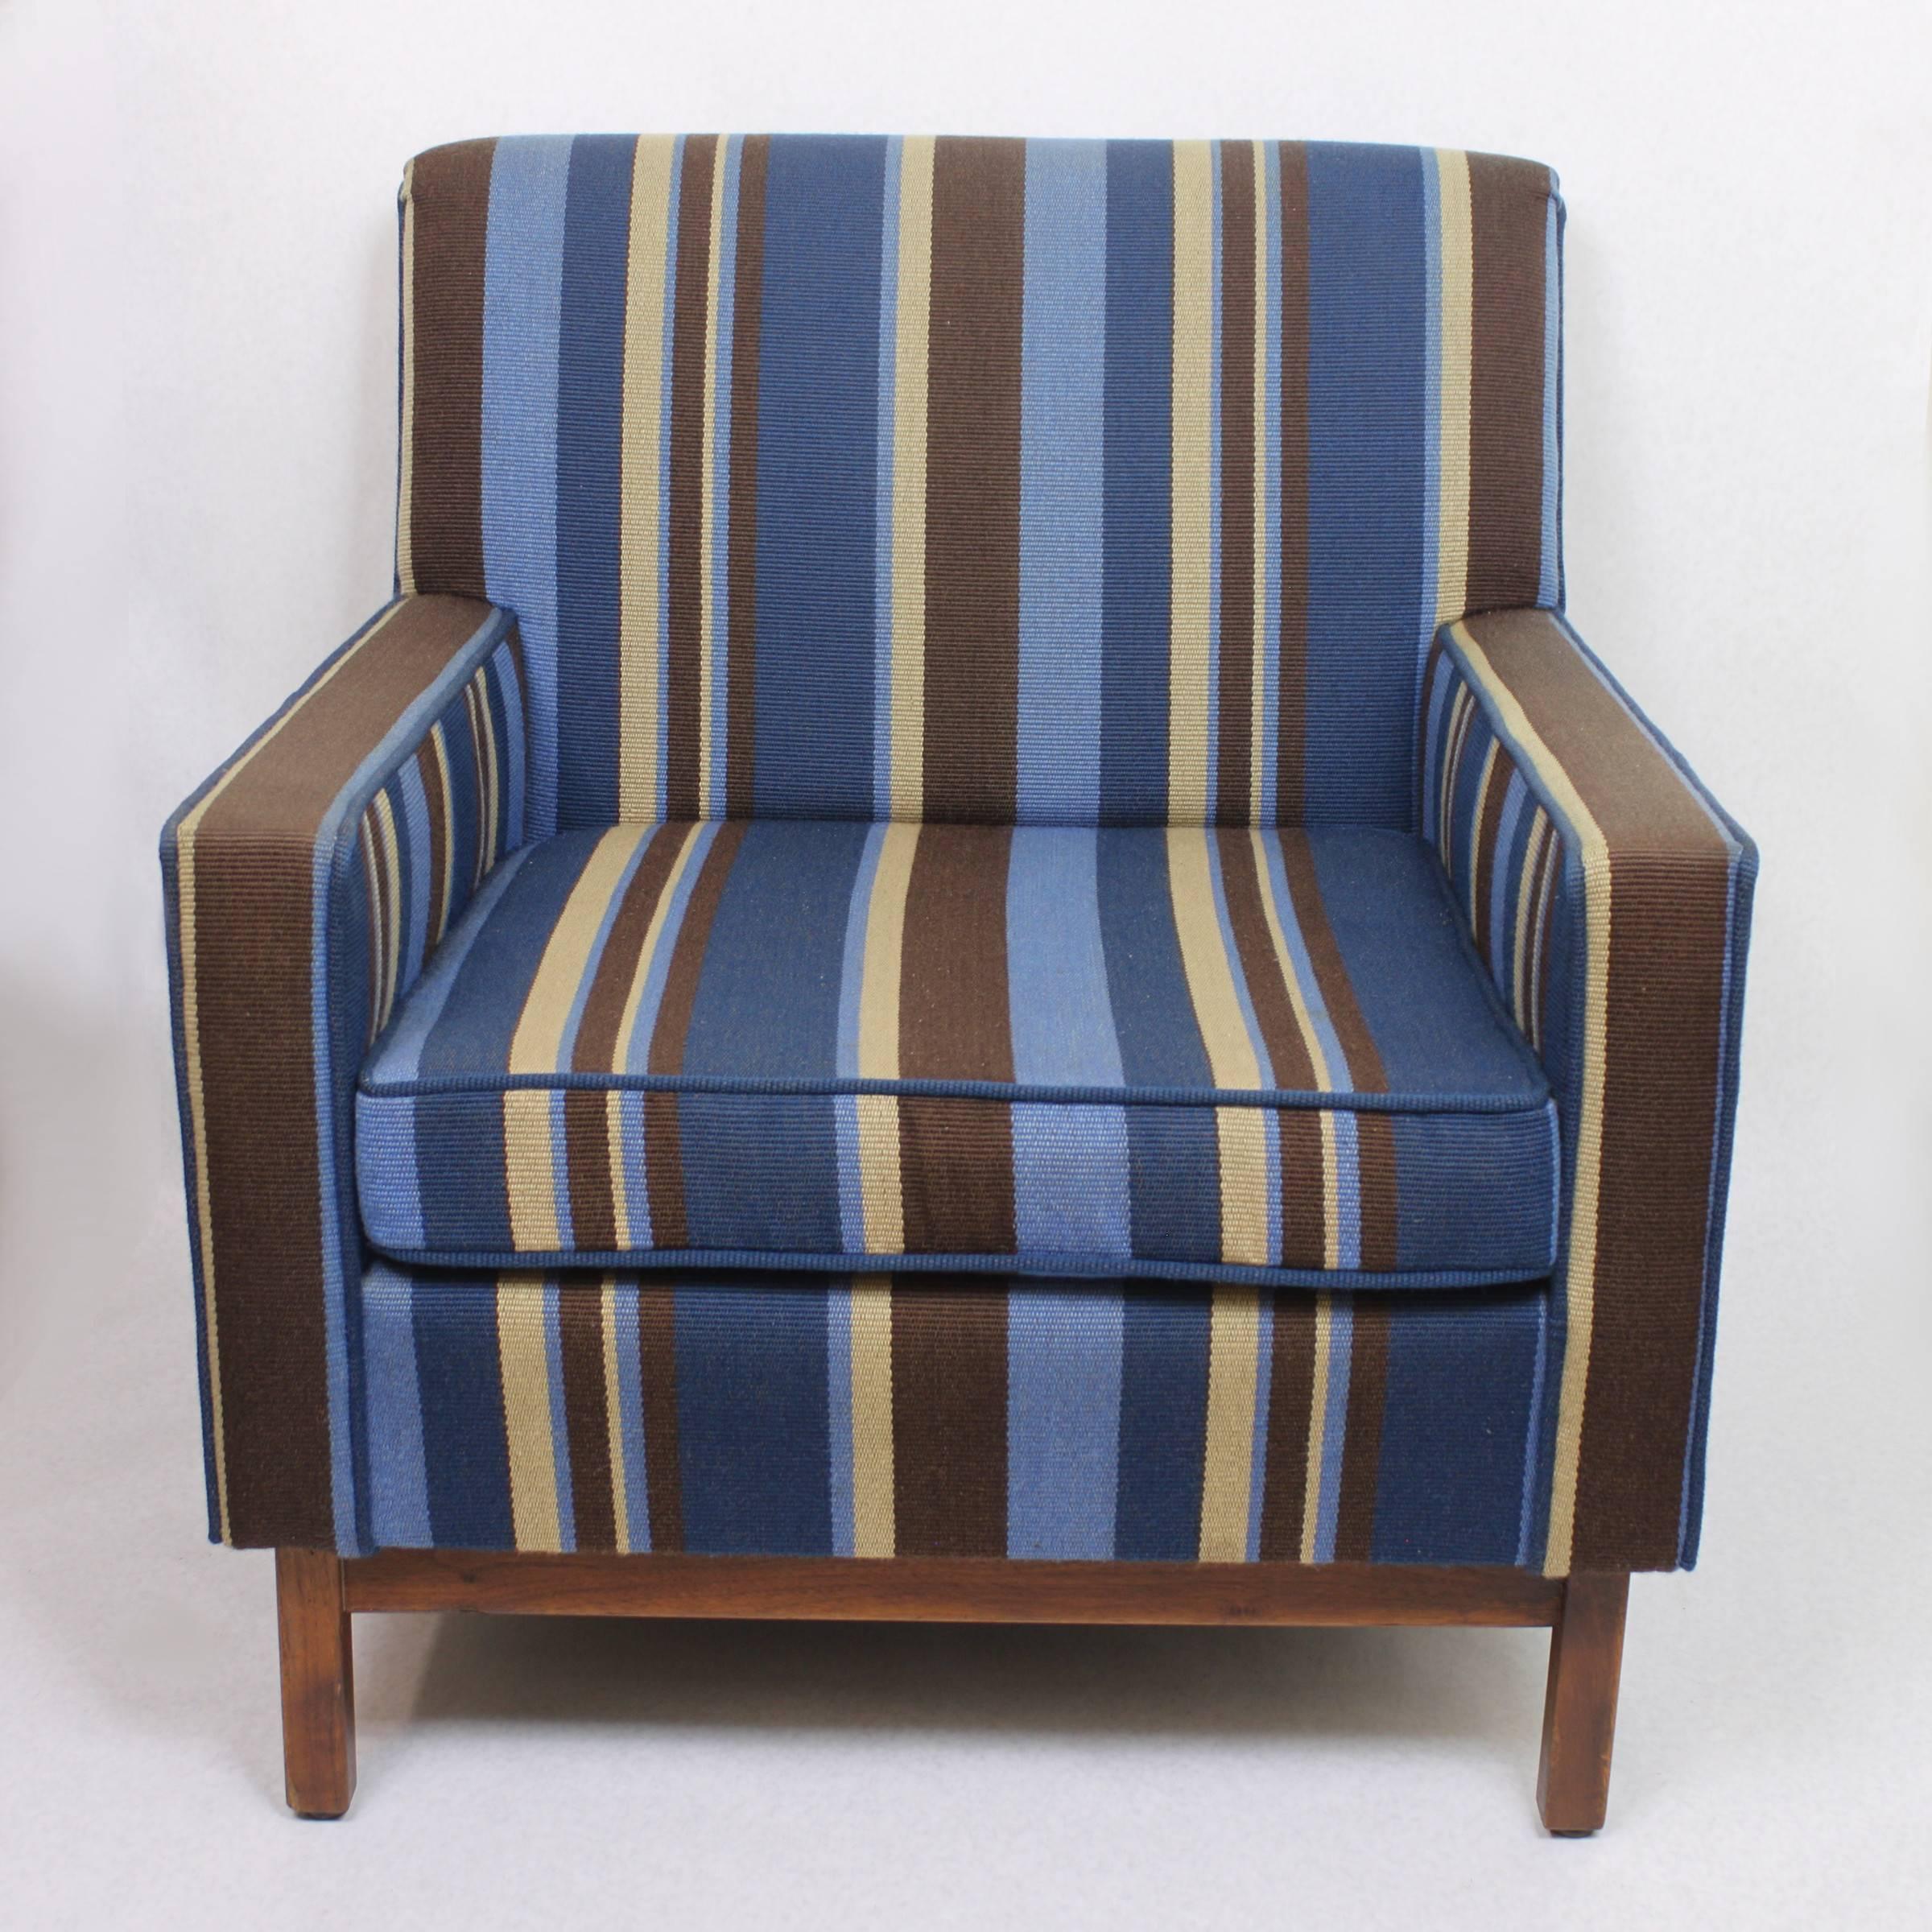 Mid-20th Century Spectacular Pair of Mid-Century Modern Blue Striped Lounge Chairs by Gunlocke